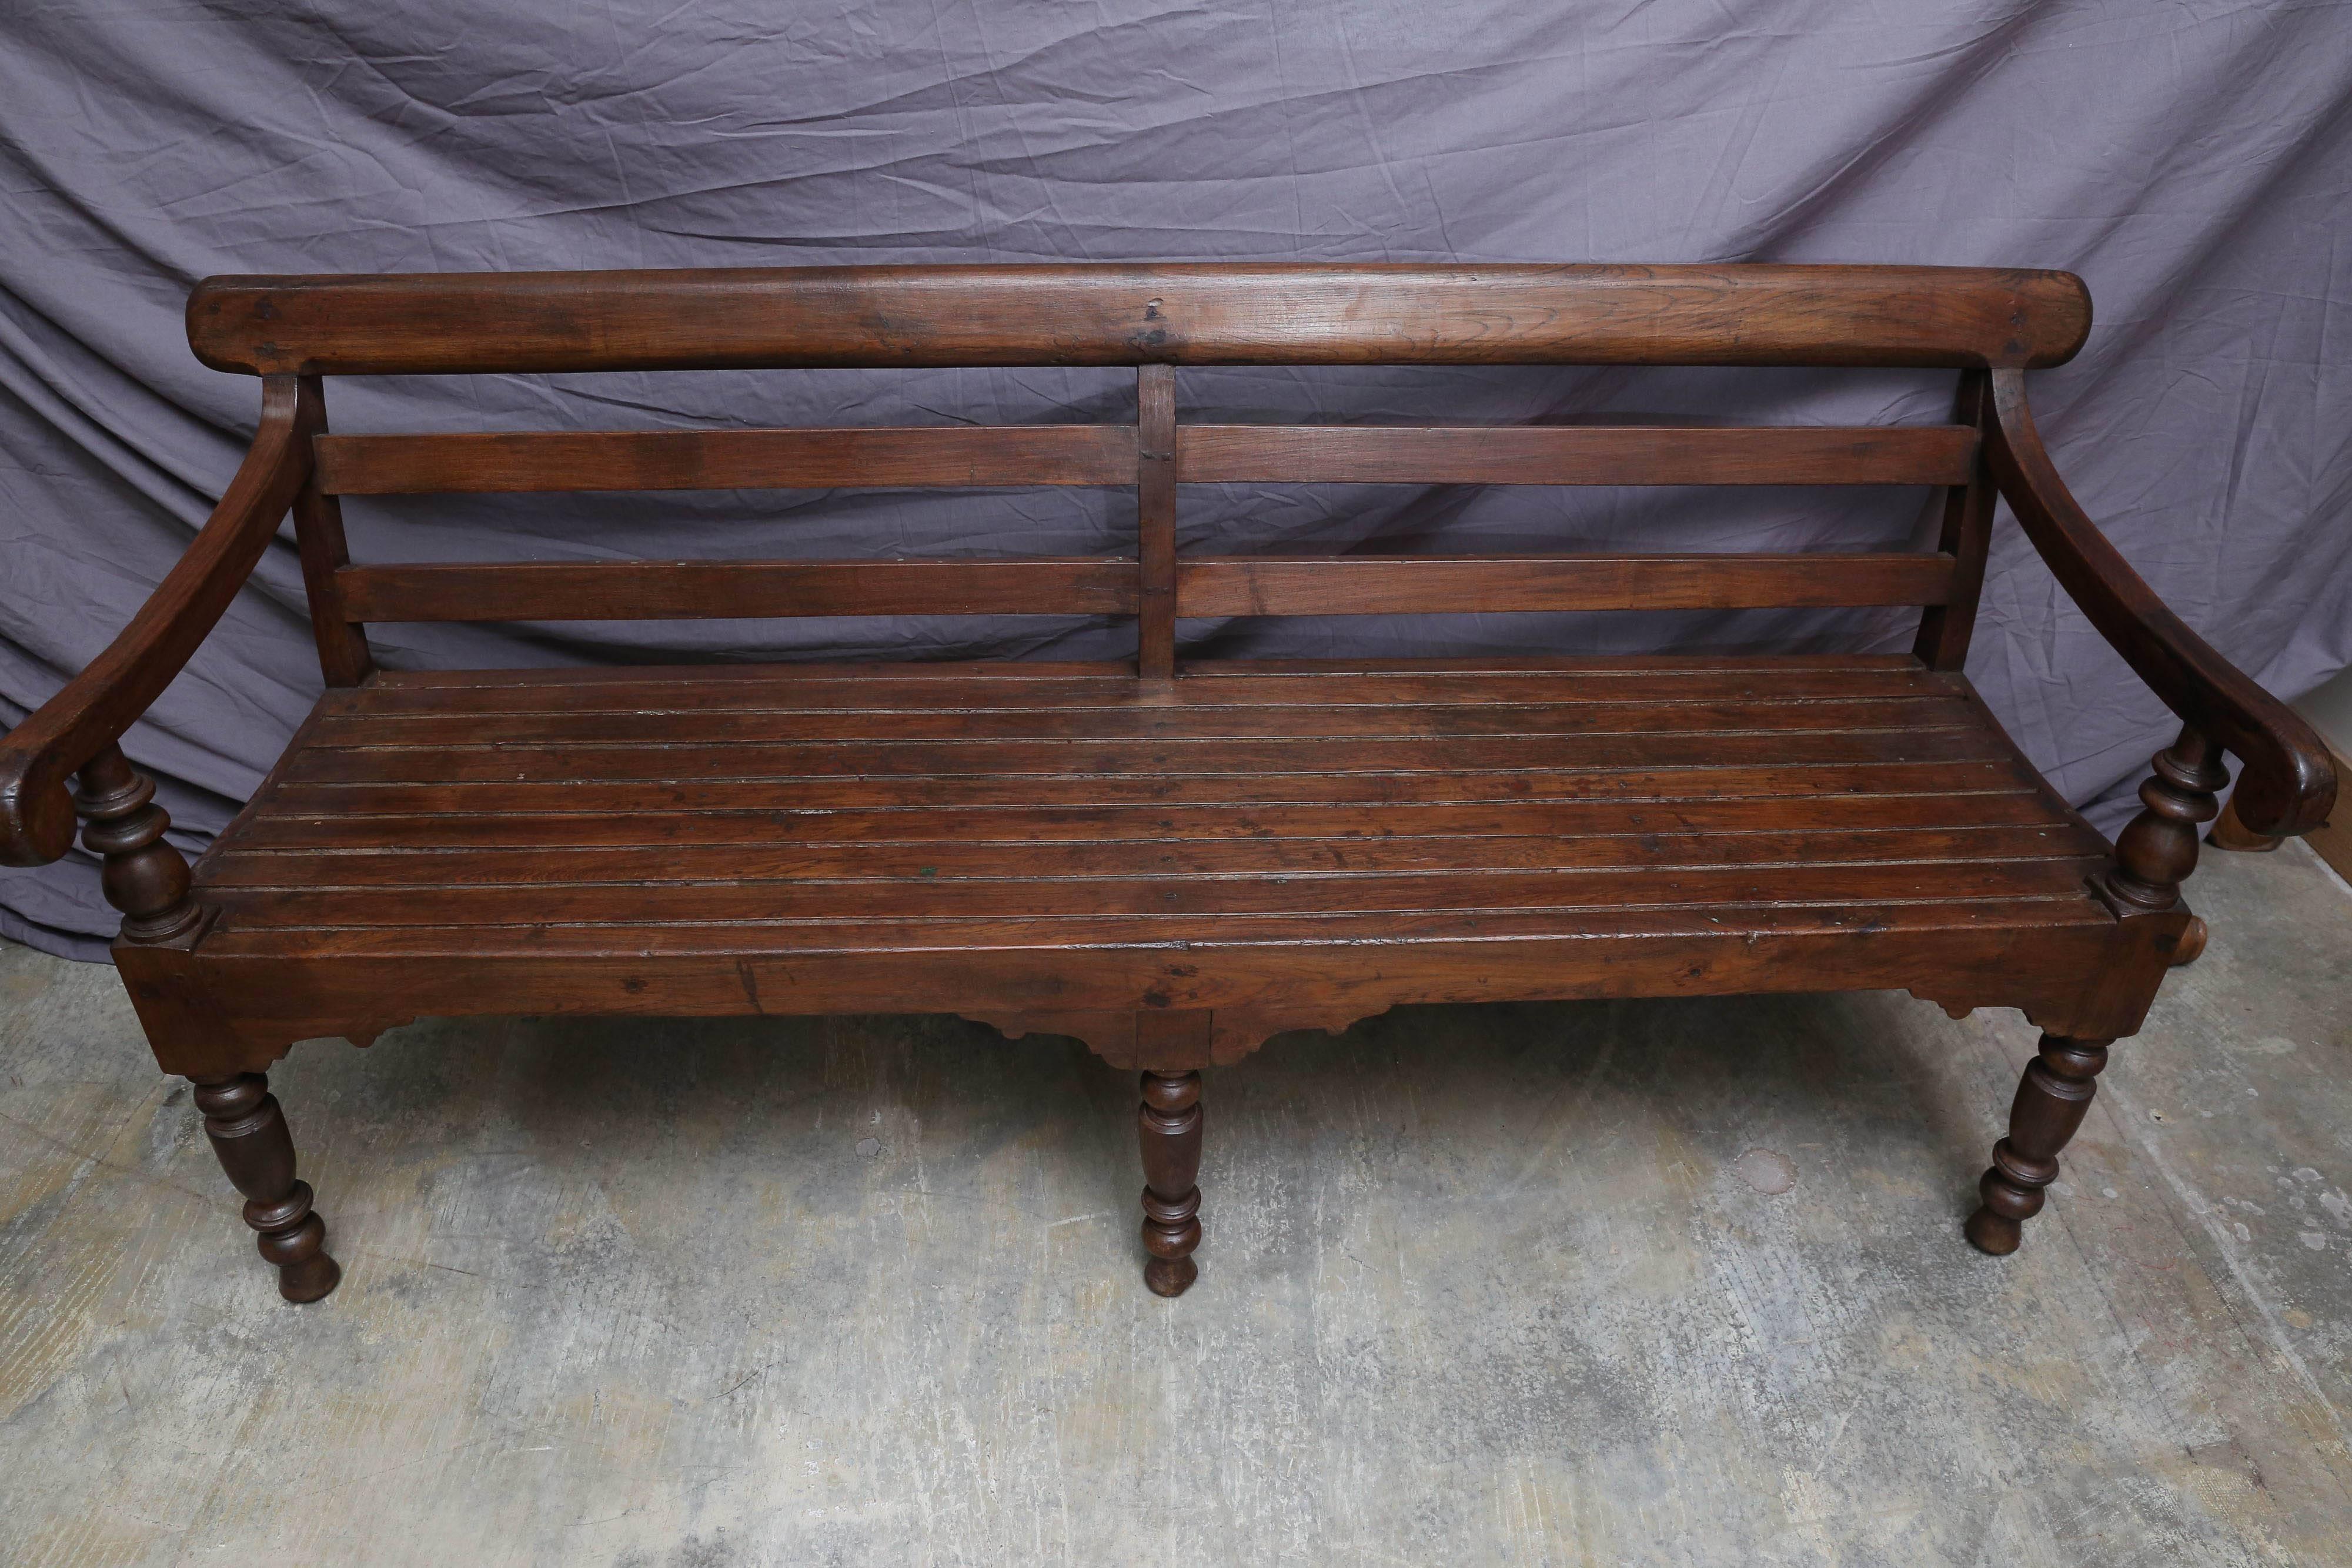 This simple bench is made of solid teak wood, contoured for comfort and is supported by six carved legs. It comes from a colonial tea plantation. It is made in the old world style of carpentry and has a rich wood patina. These benches have weathered